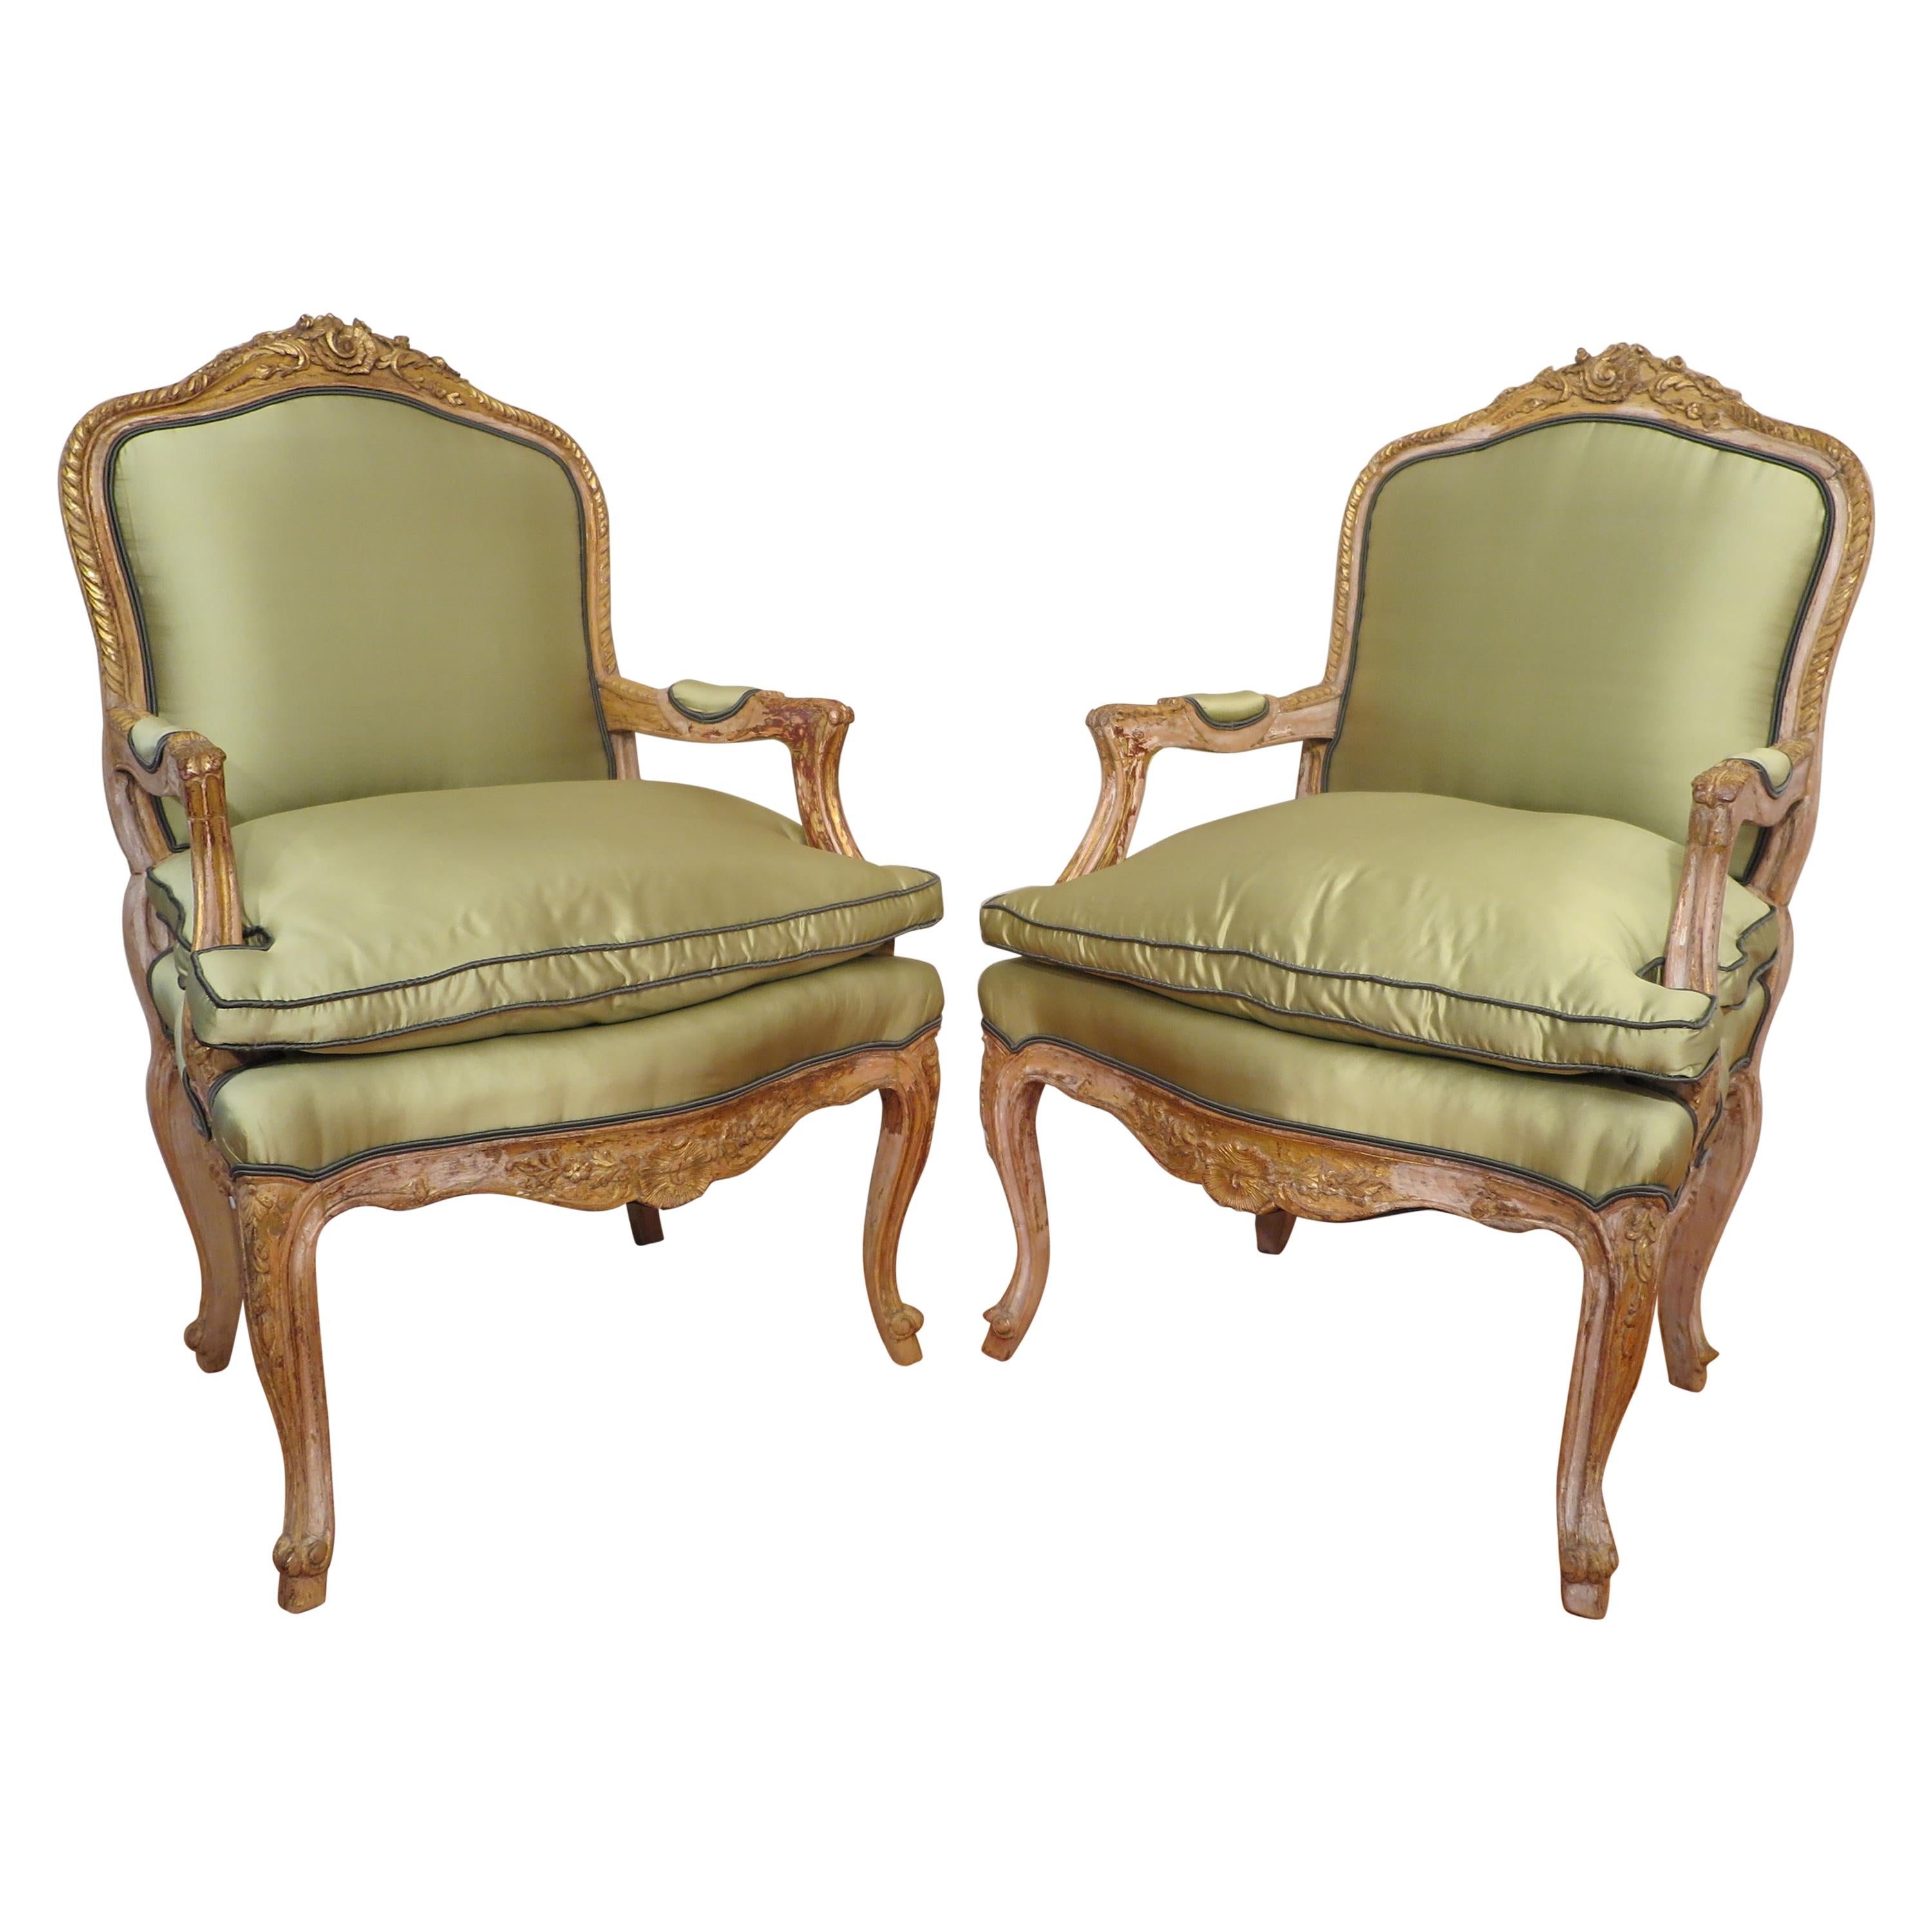 19th Century French Louis XV Bergères Chairs